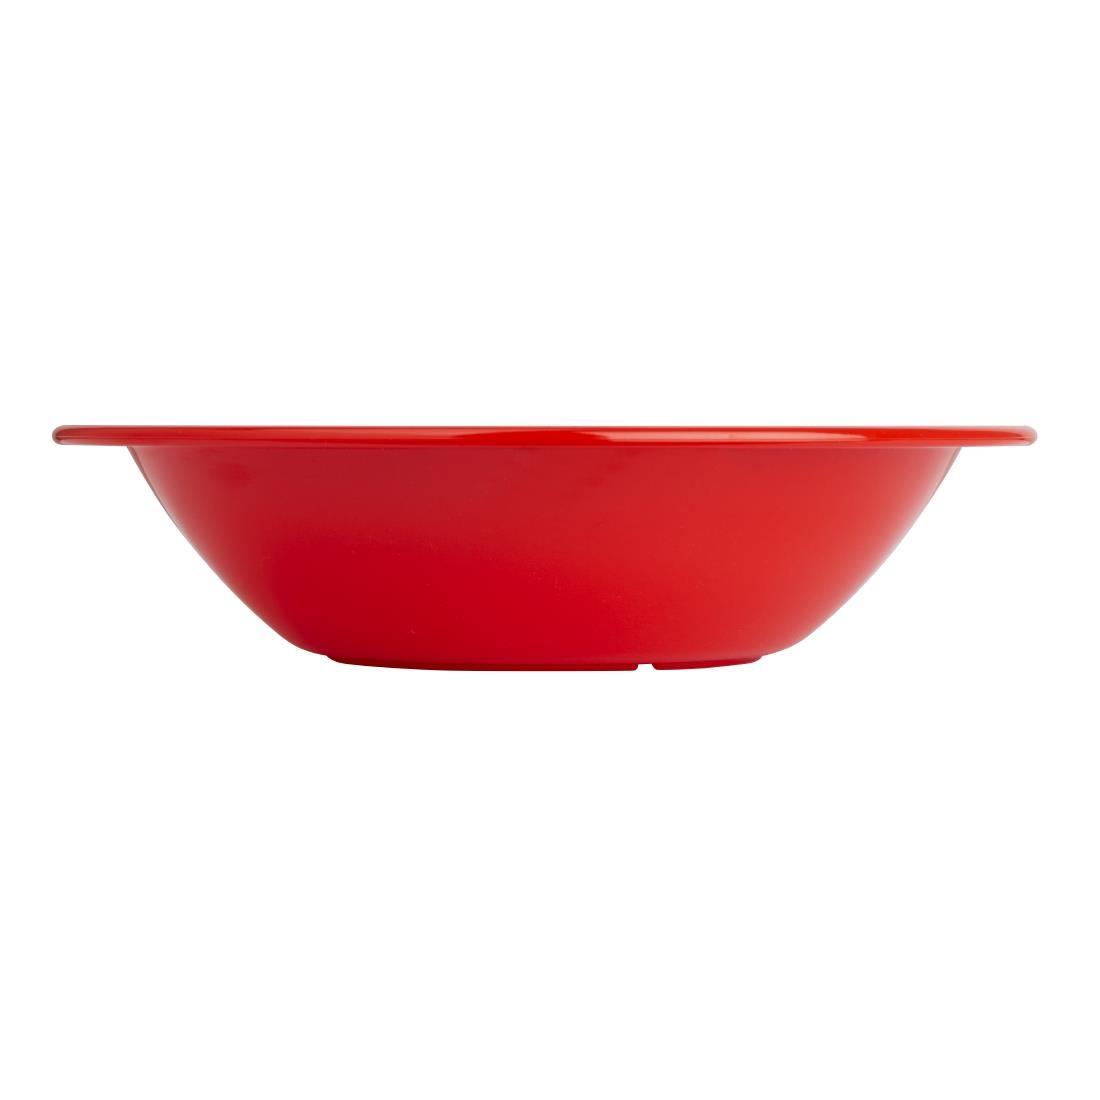 Olympia Kristallon Polycarbonate Bowls Red 172mm (Pack of 12) - CB774  - 2